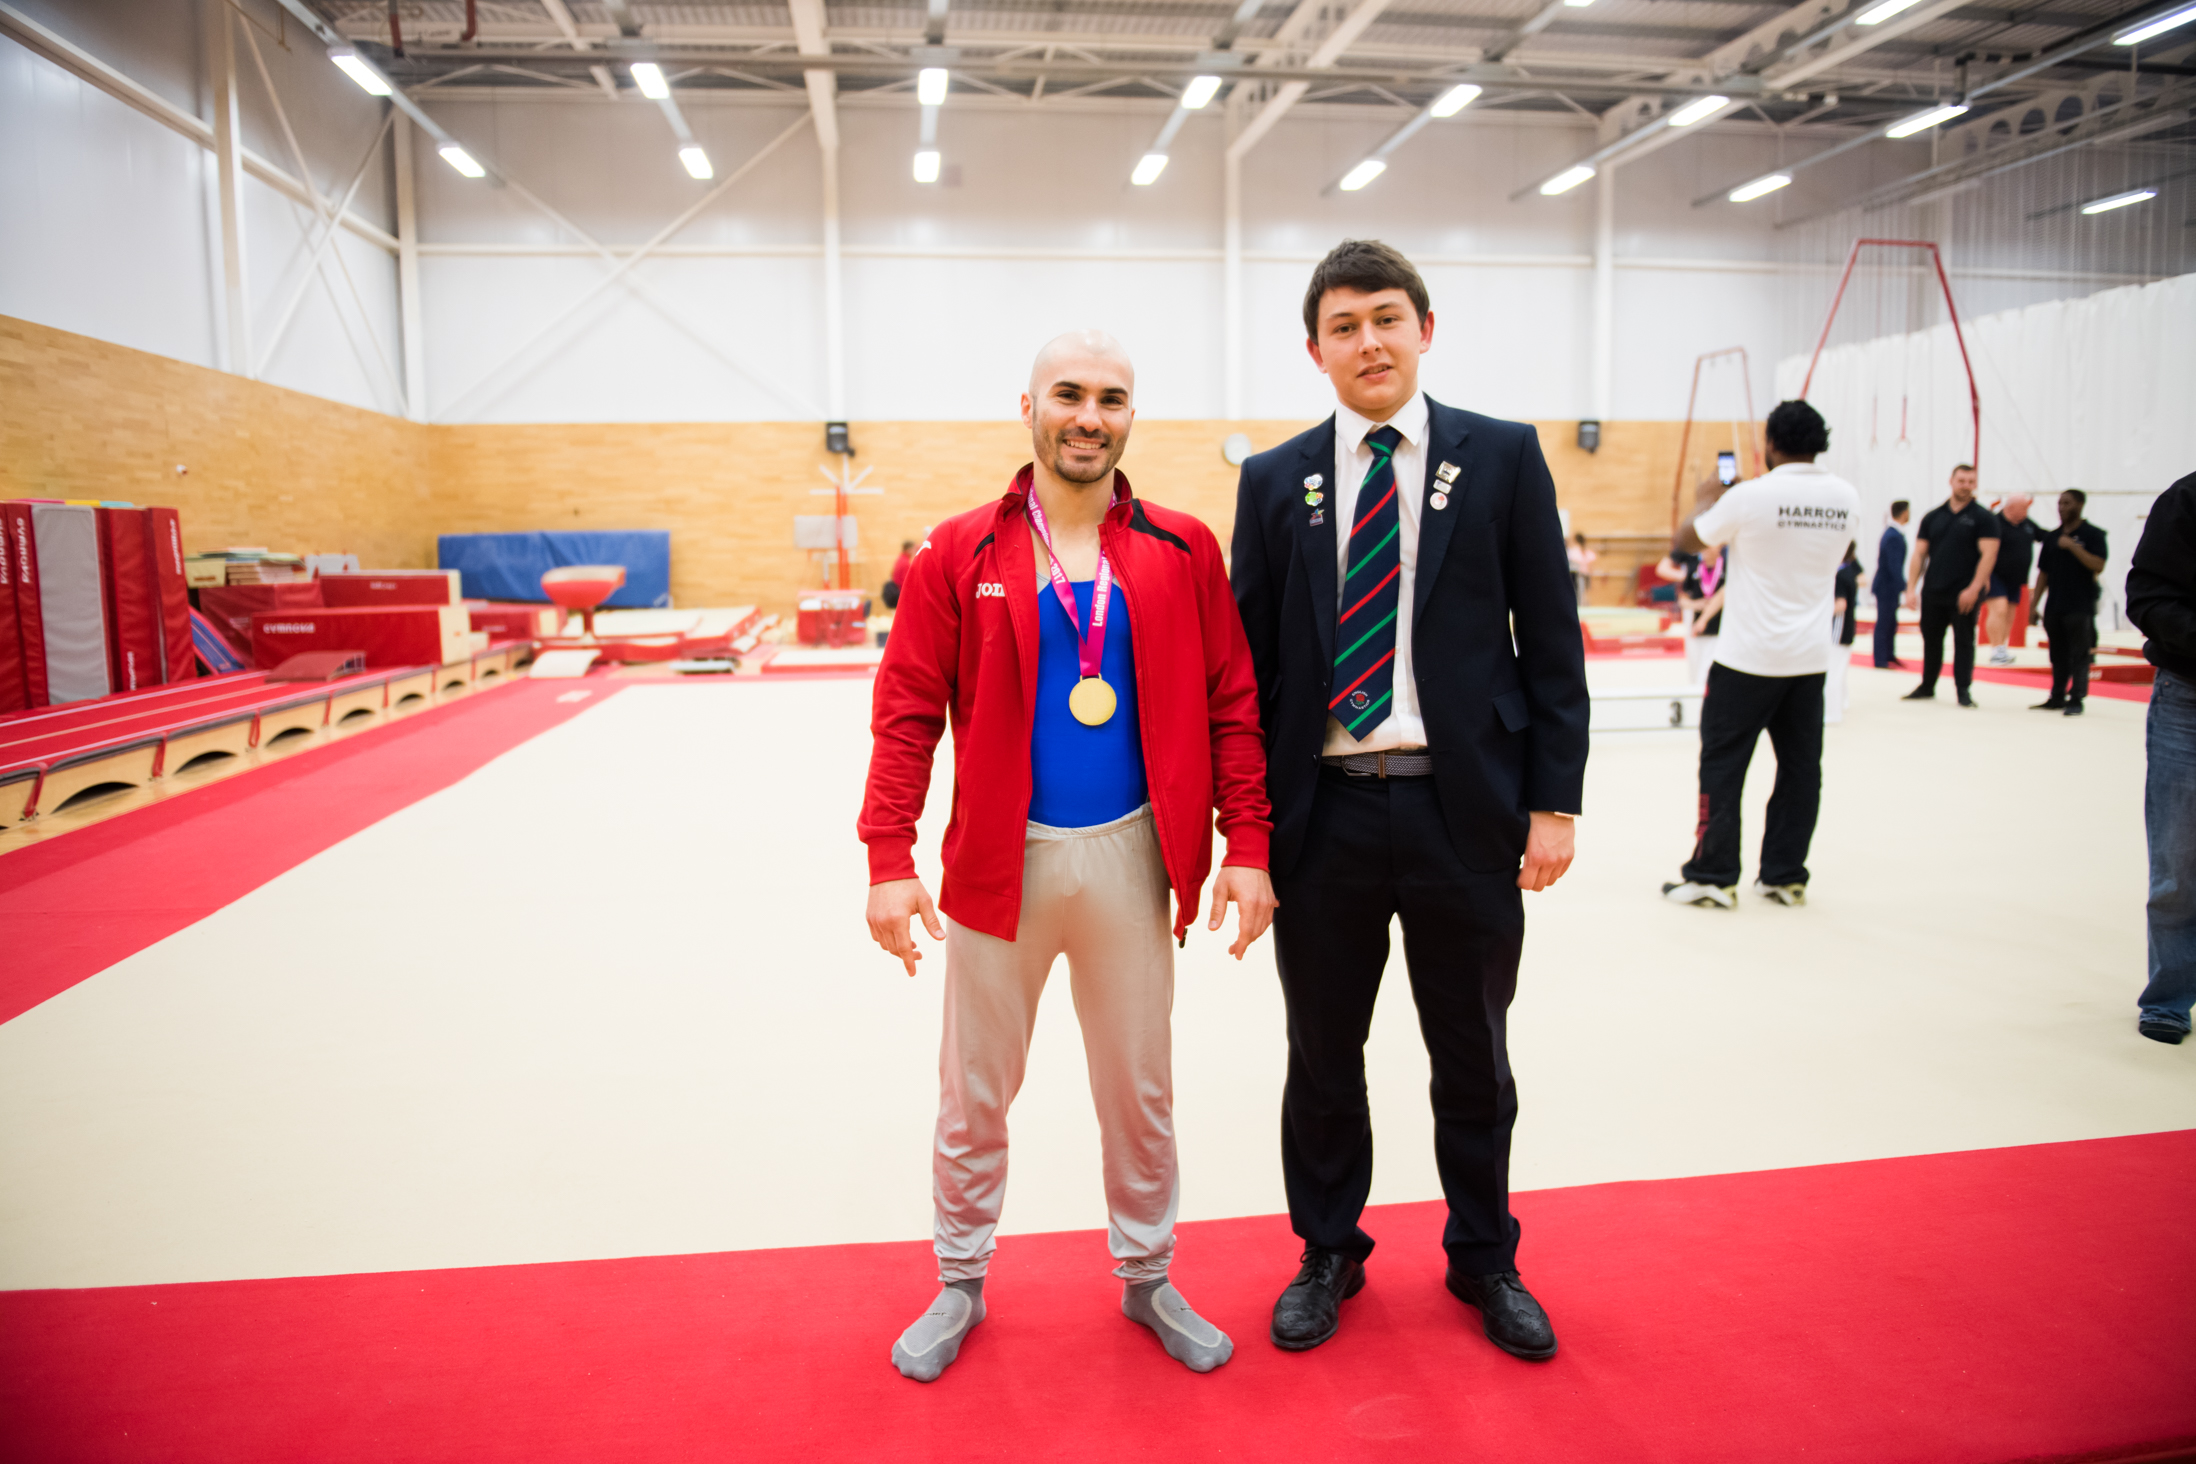 With our Men's Artistic Gymnastics National Judge Paul Newton